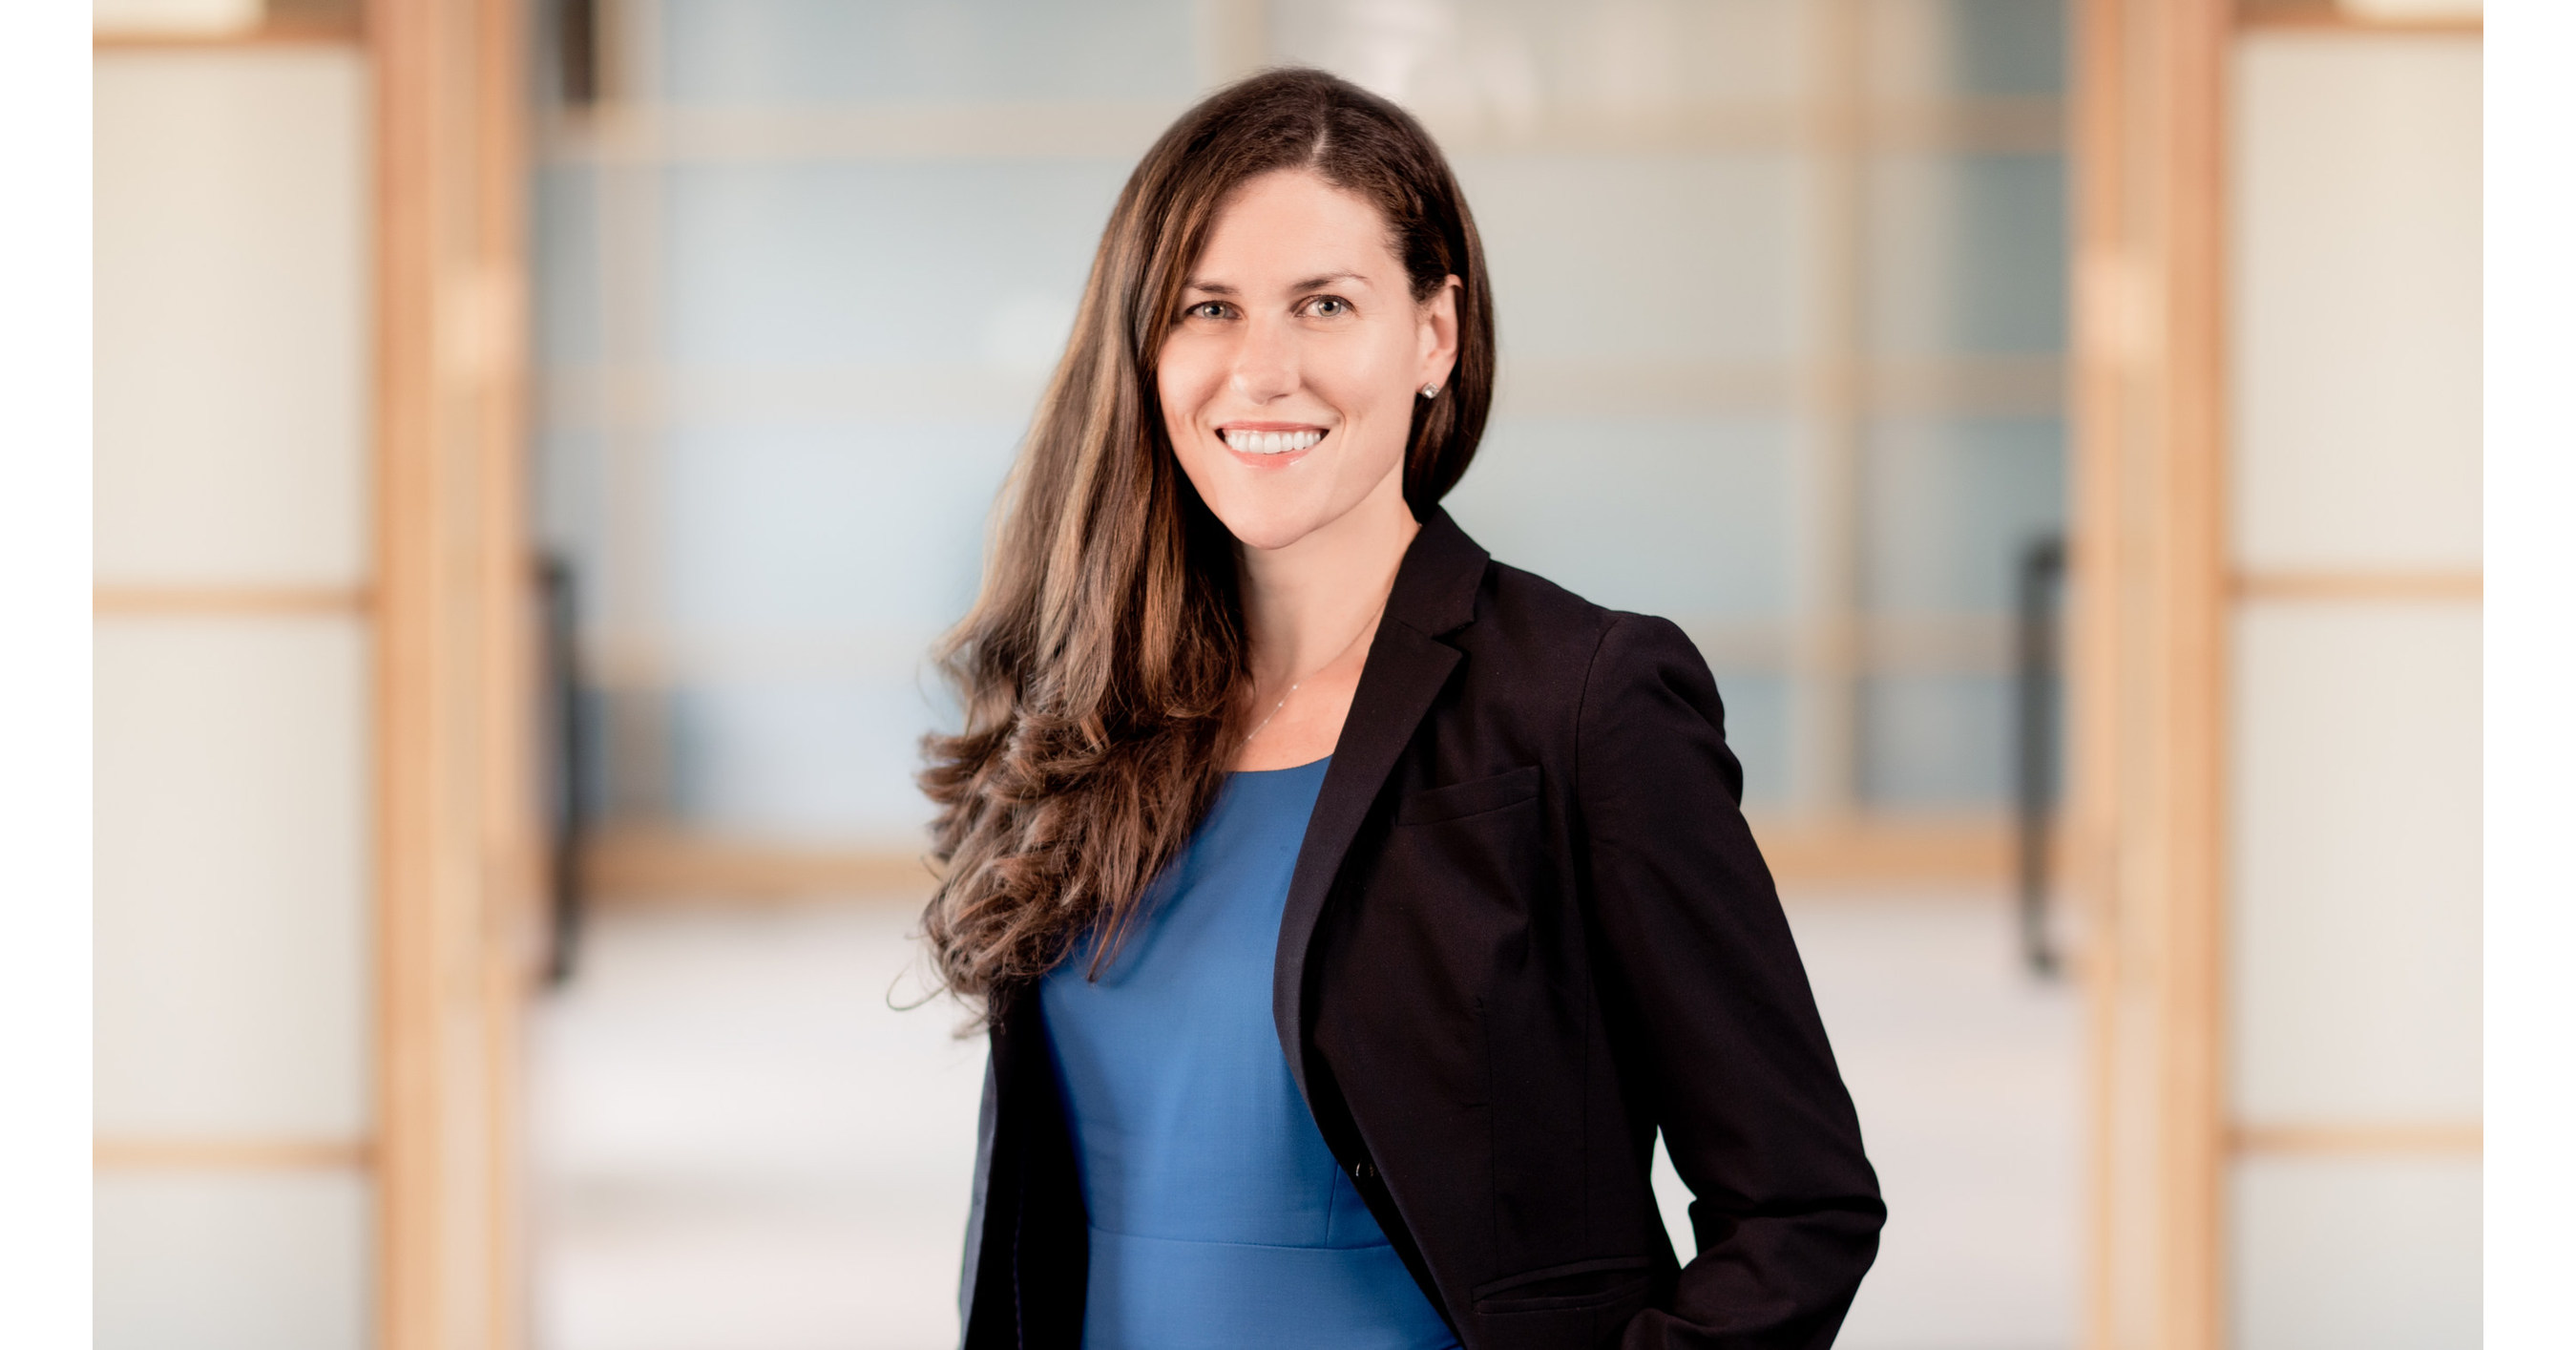 Goulston And Storrs Attorney Alana Rusin Named 2020 Up And Coming Lawyer By Massachusetts Lawyers